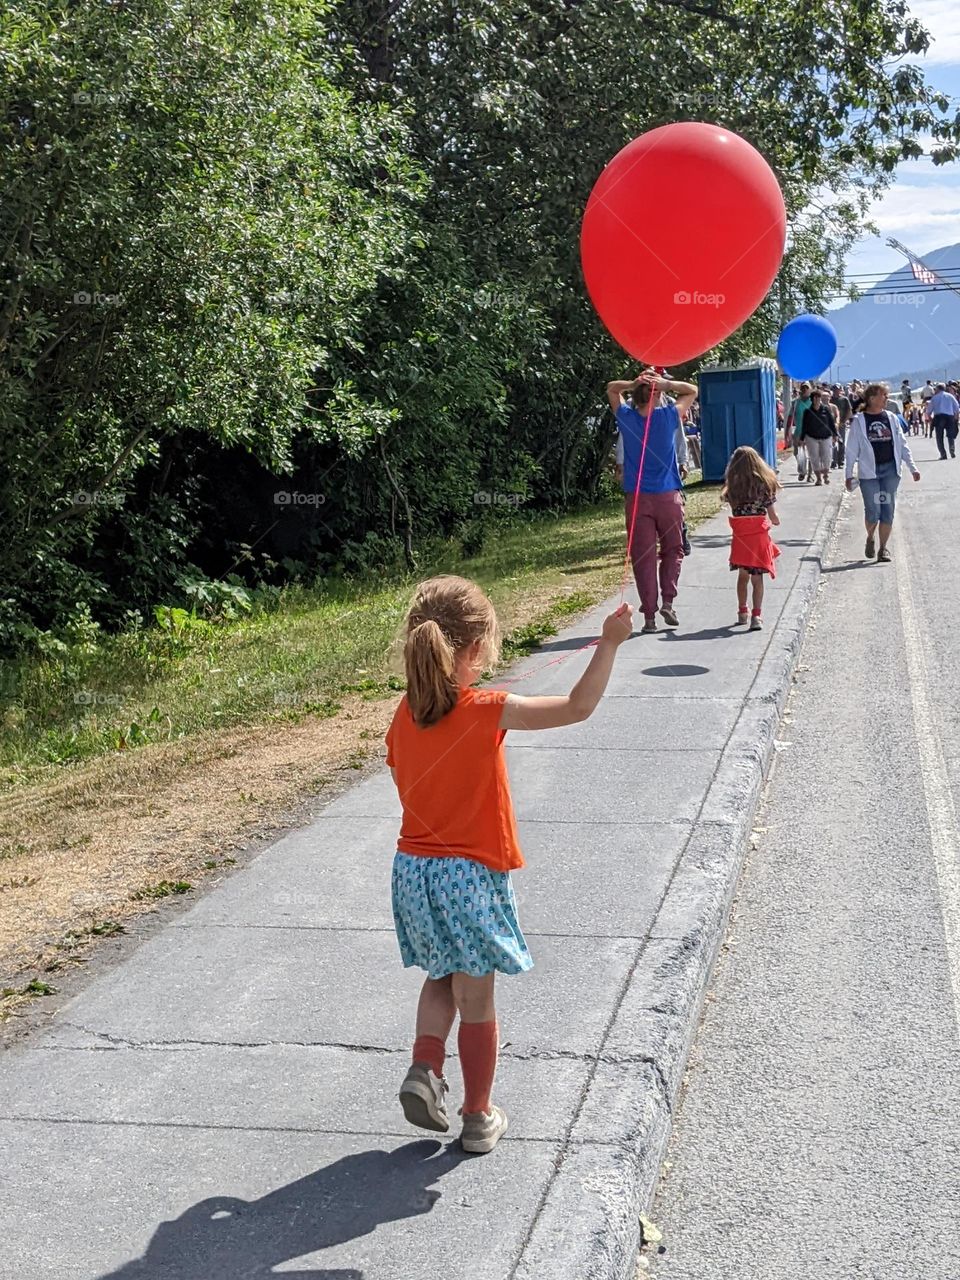 Girl with a balloon during festivities